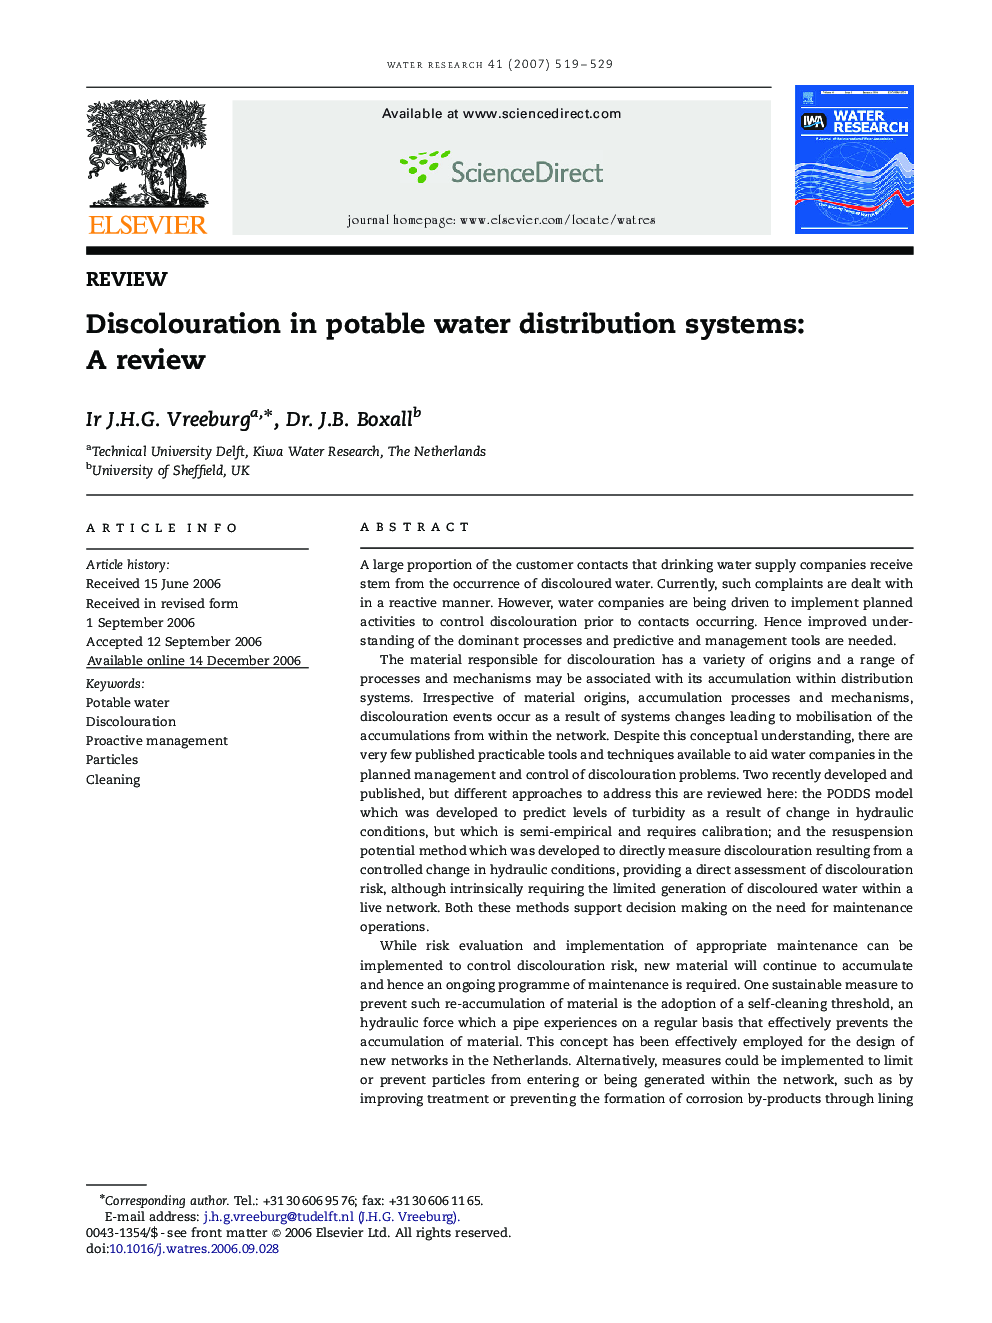 Discolouration in potable water distribution systems: A review